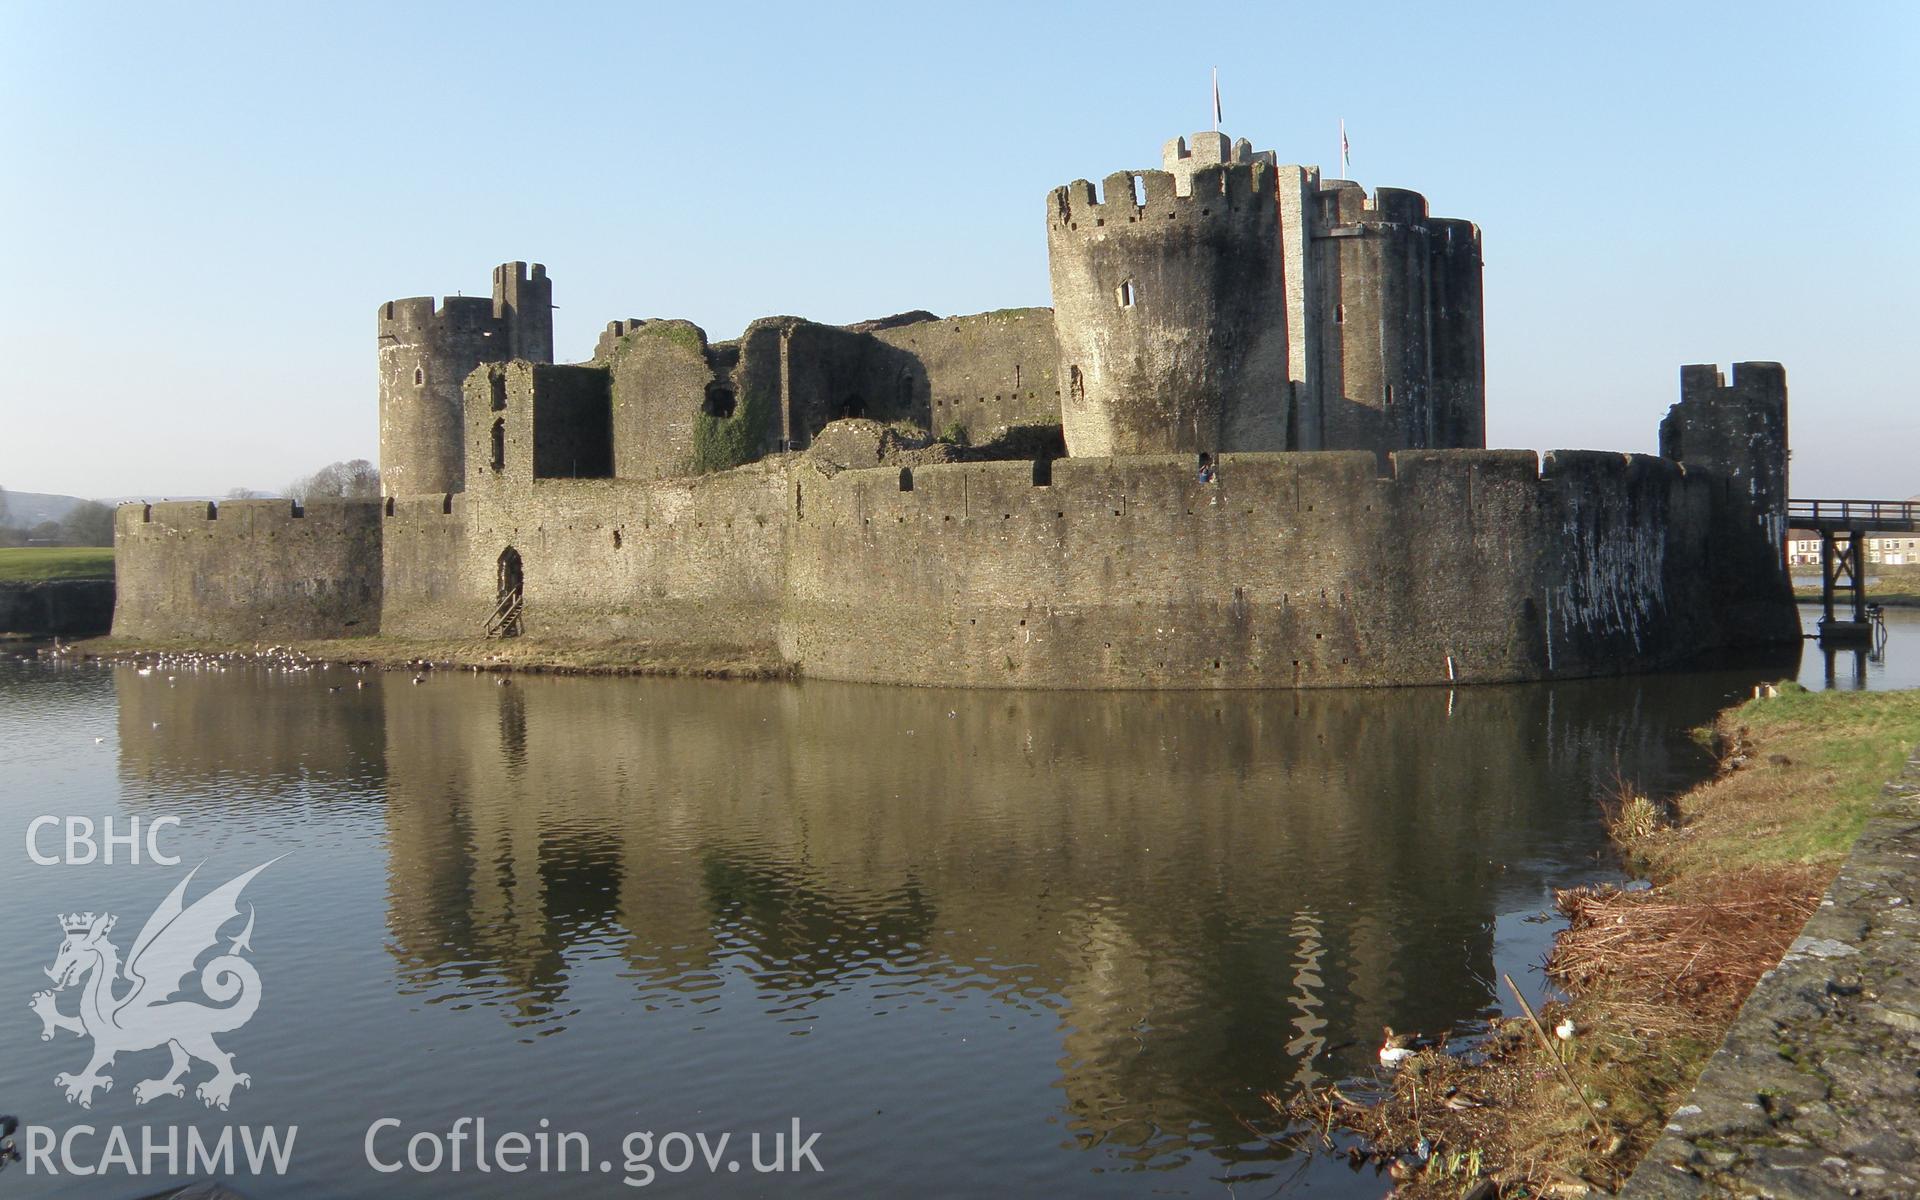 Colour photo of Caerphilly Castle, taken by Paul R. Davis, 11th February 2012.